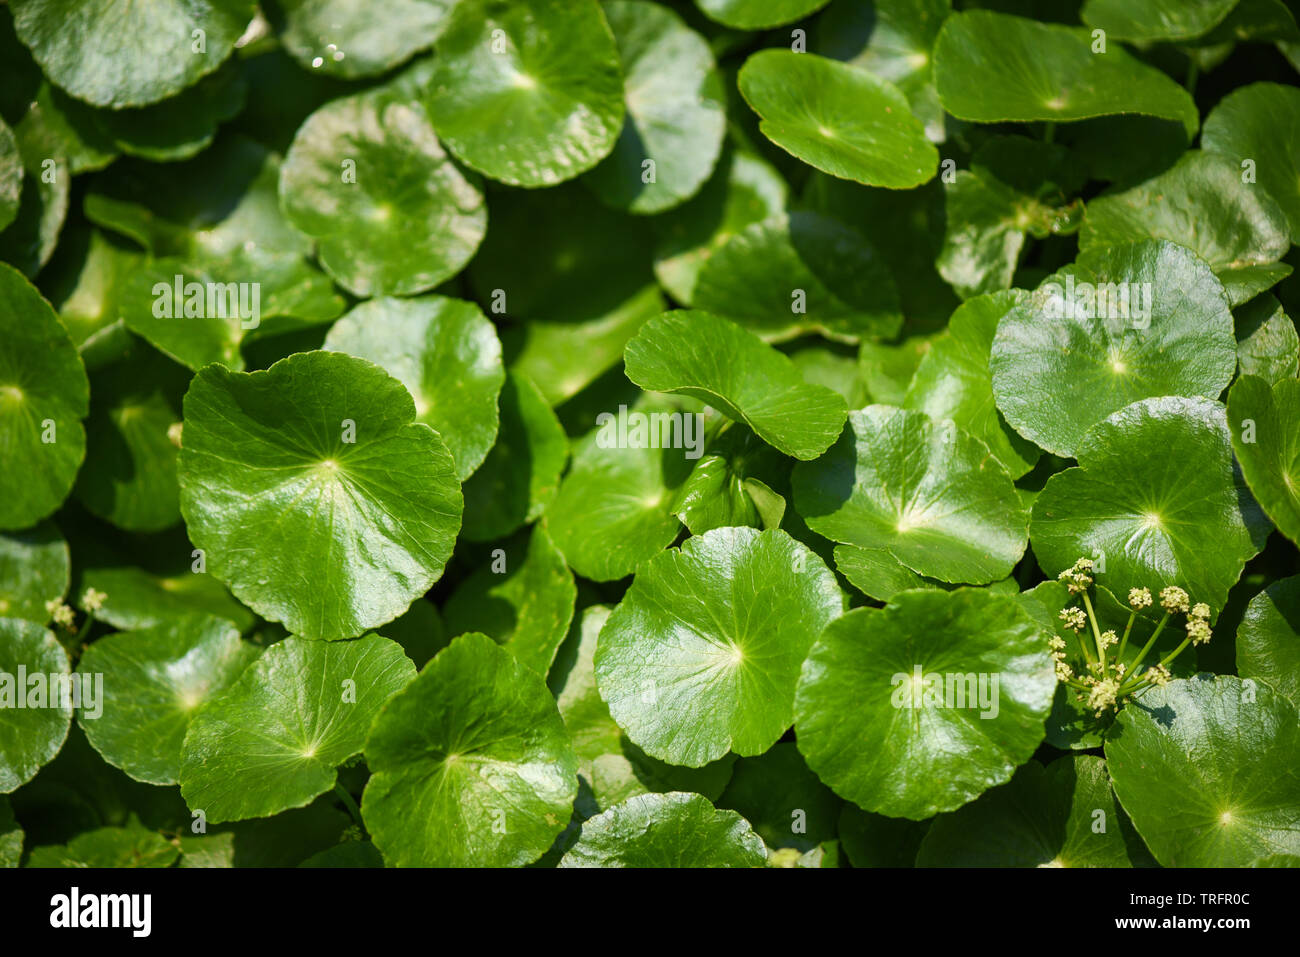 Centella asiatica leaves green nature leaf medical herb in the garden background / Asiatic Pennywort Stock Photo